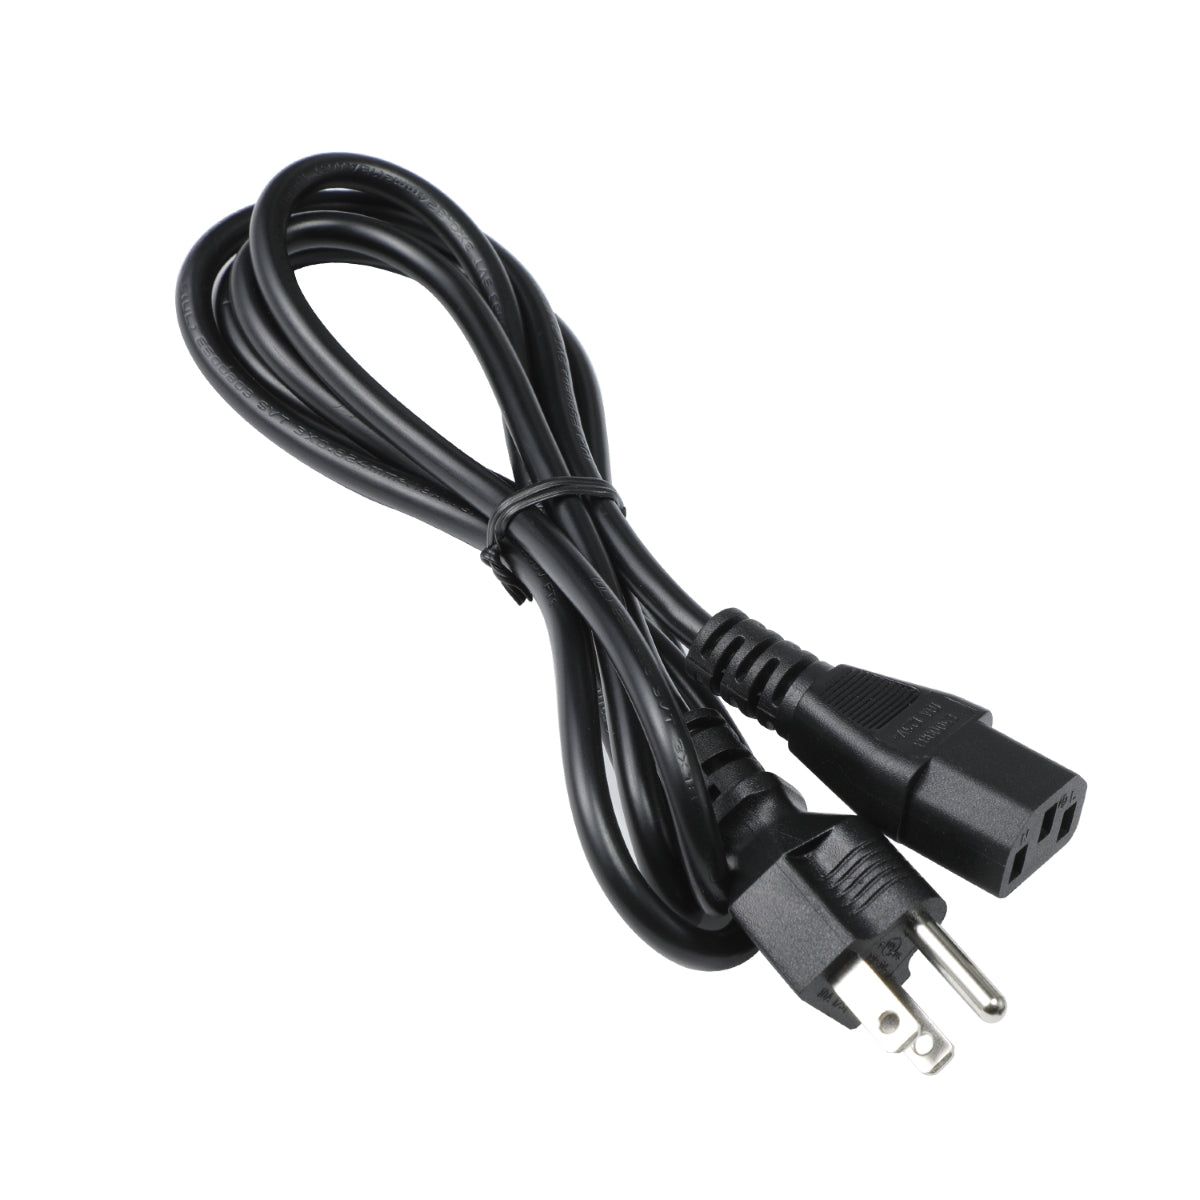 Power Cable for Philips 221S8LDSB Monitor.